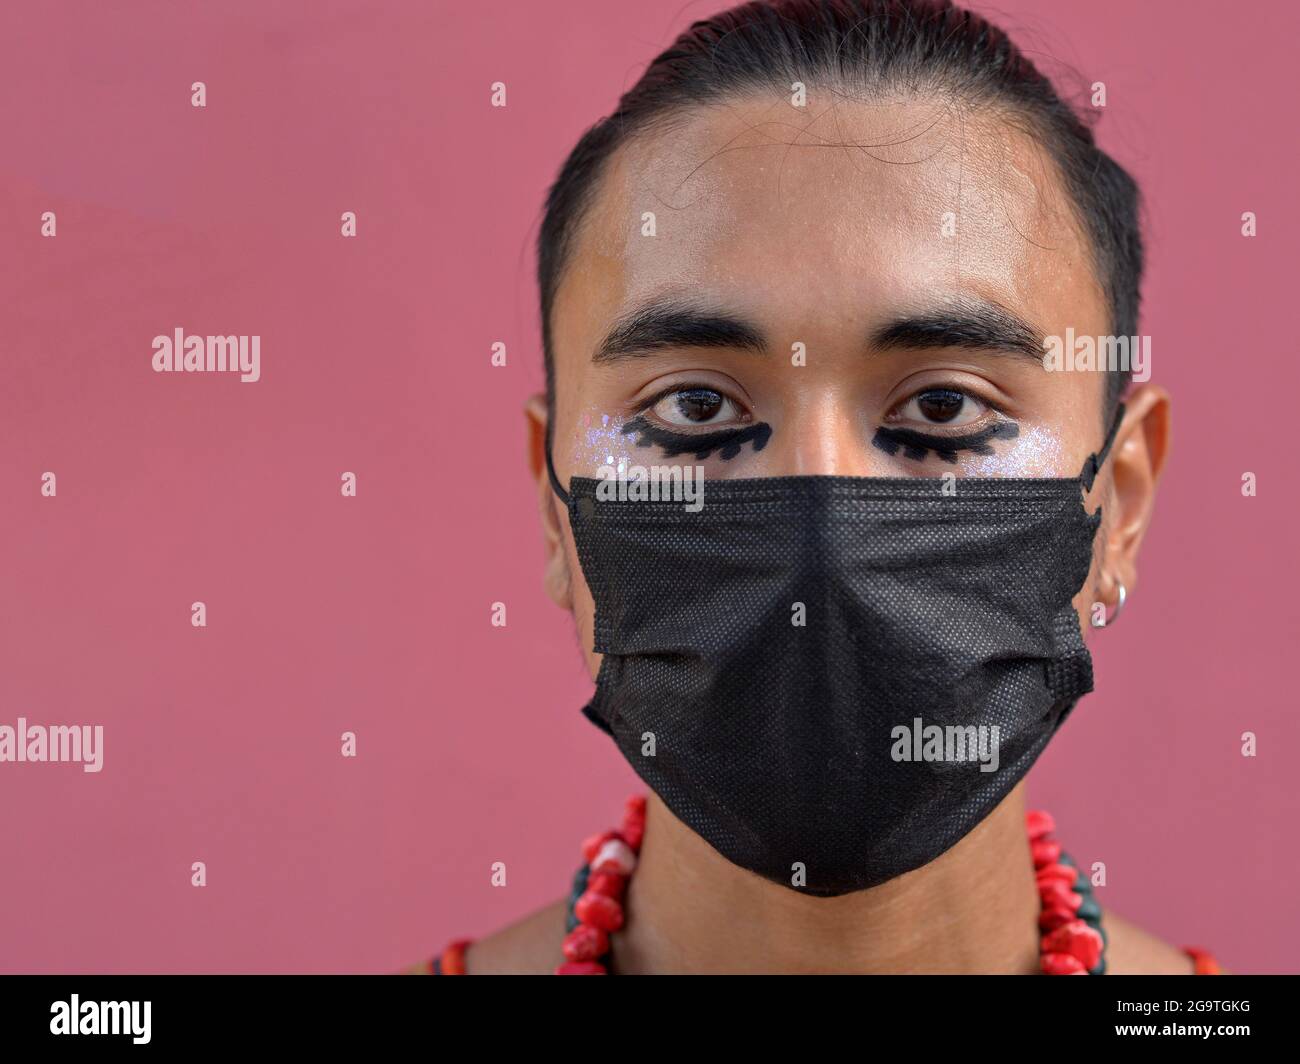 Young Latino man with romantic brown eyes and elaborate black eye make-up wears a disposable black corona face mask and looks at the viewer. Stock Photo